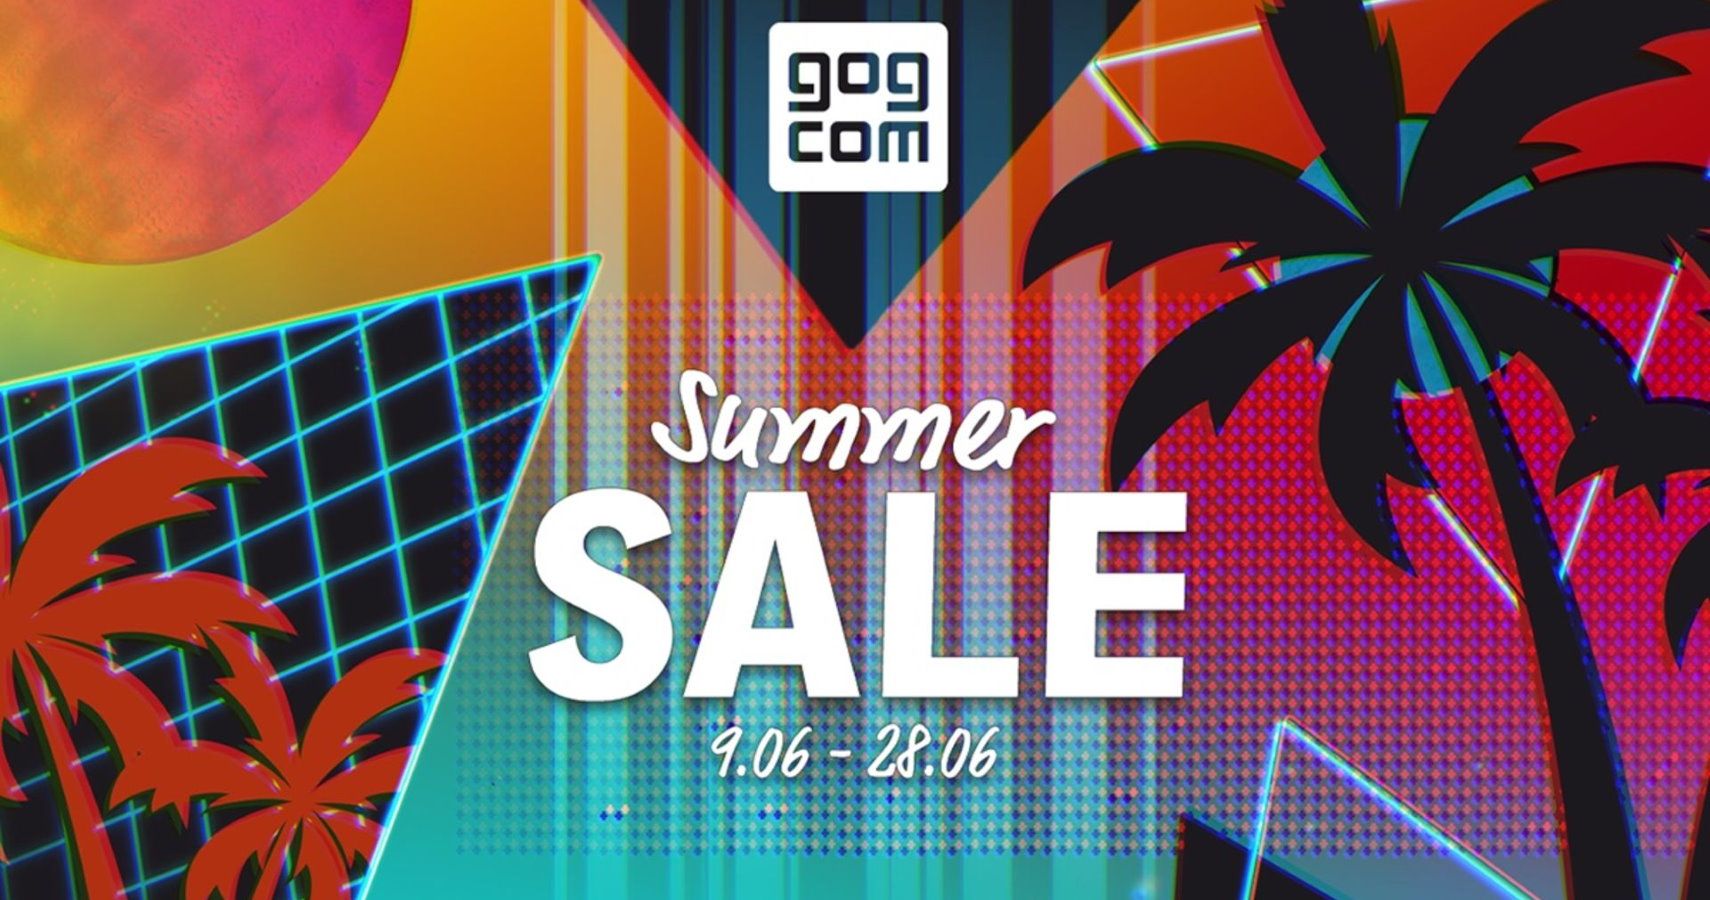 GOG Summer Sale Dunks The Price Of Over 3,400 PC Games